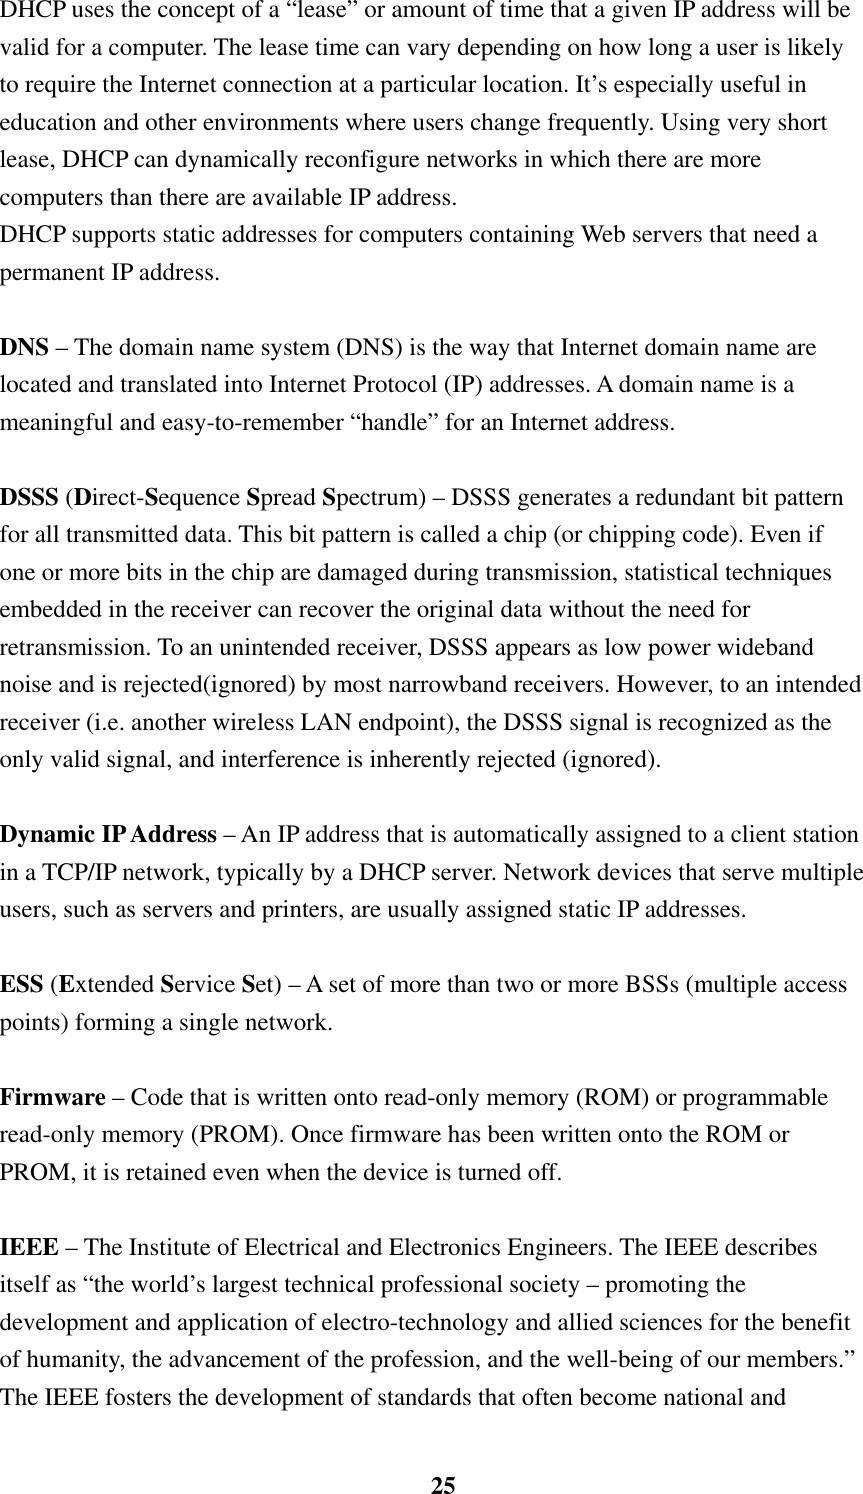    25DHCP uses the concept of a “lease” or amount of time that a given IP address will be valid for a computer. The lease time can vary depending on how long a user is likely to require the Internet connection at a particular location. It’s especially useful in education and other environments where users change frequently. Using very short lease, DHCP can dynamically reconfigure networks in which there are more computers than there are available IP address. DHCP supports static addresses for computers containing Web servers that need a permanent IP address.    DNS – The domain name system (DNS) is the way that Internet domain name are located and translated into Internet Protocol (IP) addresses. A domain name is a meaningful and easy-to-remember “handle” for an Internet address.  DSSS (Direct-Sequence Spread Spectrum) – DSSS generates a redundant bit pattern for all transmitted data. This bit pattern is called a chip (or chipping code). Even if one or more bits in the chip are damaged during transmission, statistical techniques embedded in the receiver can recover the original data without the need for retransmission. To an unintended receiver, DSSS appears as low power wideband noise and is rejected(ignored) by most narrowband receivers. However, to an intended receiver (i.e. another wireless LAN endpoint), the DSSS signal is recognized as the only valid signal, and interference is inherently rejected (ignored).  Dynamic IP Address – An IP address that is automatically assigned to a client station in a TCP/IP network, typically by a DHCP server. Network devices that serve multiple users, such as servers and printers, are usually assigned static IP addresses.  ESS (Extended Service Set) – A set of more than two or more BSSs (multiple access points) forming a single network.  Firmware – Code that is written onto read-only memory (ROM) or programmable read-only memory (PROM). Once firmware has been written onto the ROM or PROM, it is retained even when the device is turned off.      IEEE – The Institute of Electrical and Electronics Engineers. The IEEE describes itself as “the world’s largest technical professional society – promoting the development and application of electro-technology and allied sciences for the benefit of humanity, the advancement of the profession, and the well-being of our members.” The IEEE fosters the development of standards that often become national and 